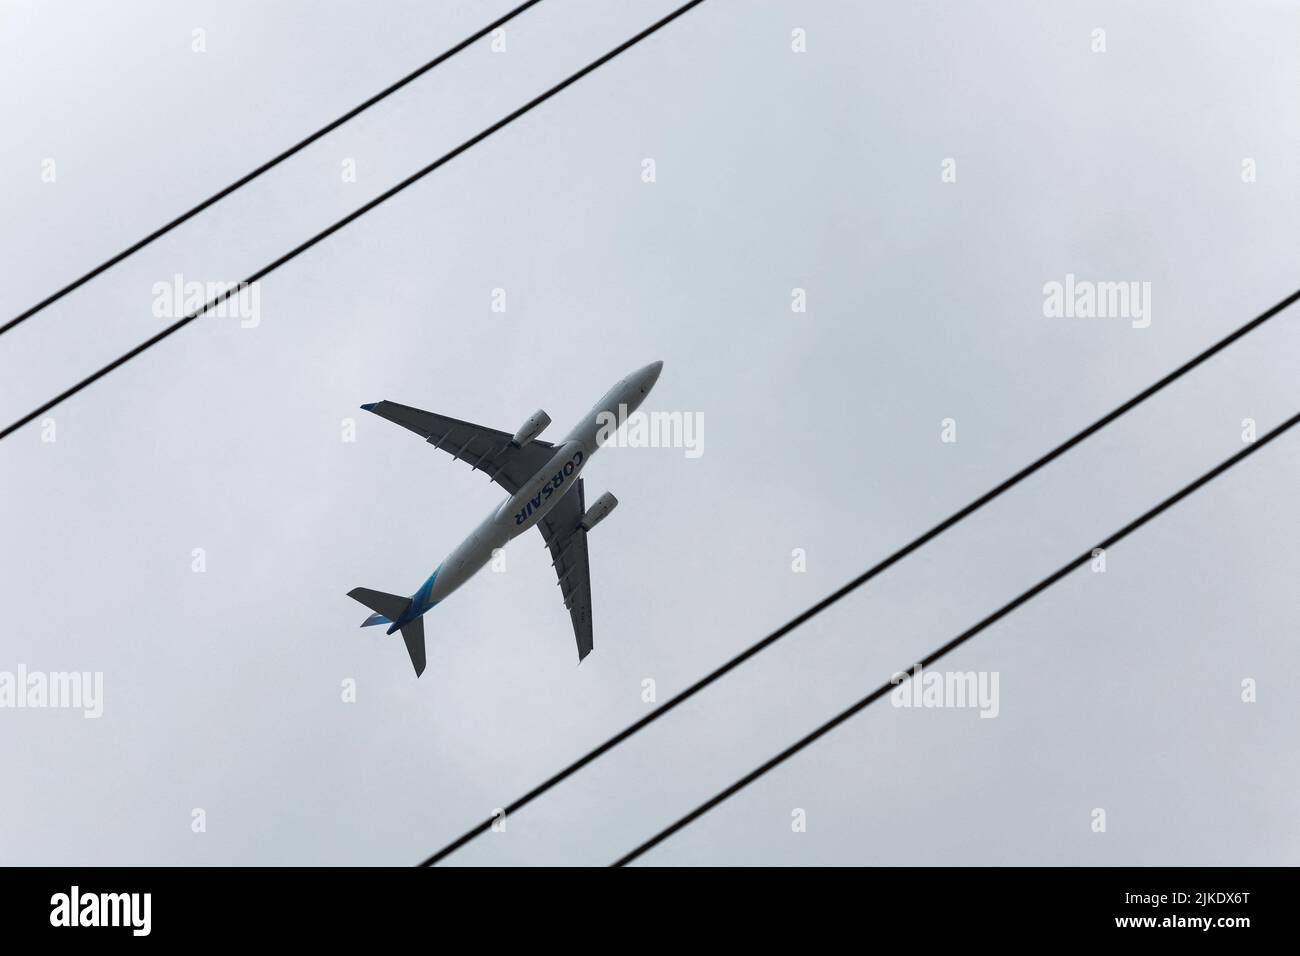 An Airbus A330 operated by Corsair flies over electric lines in Villebon-sur-Yvette, near Paris, France, August 1, 2022. REUTERS/Benoit Tessier Stock Photo